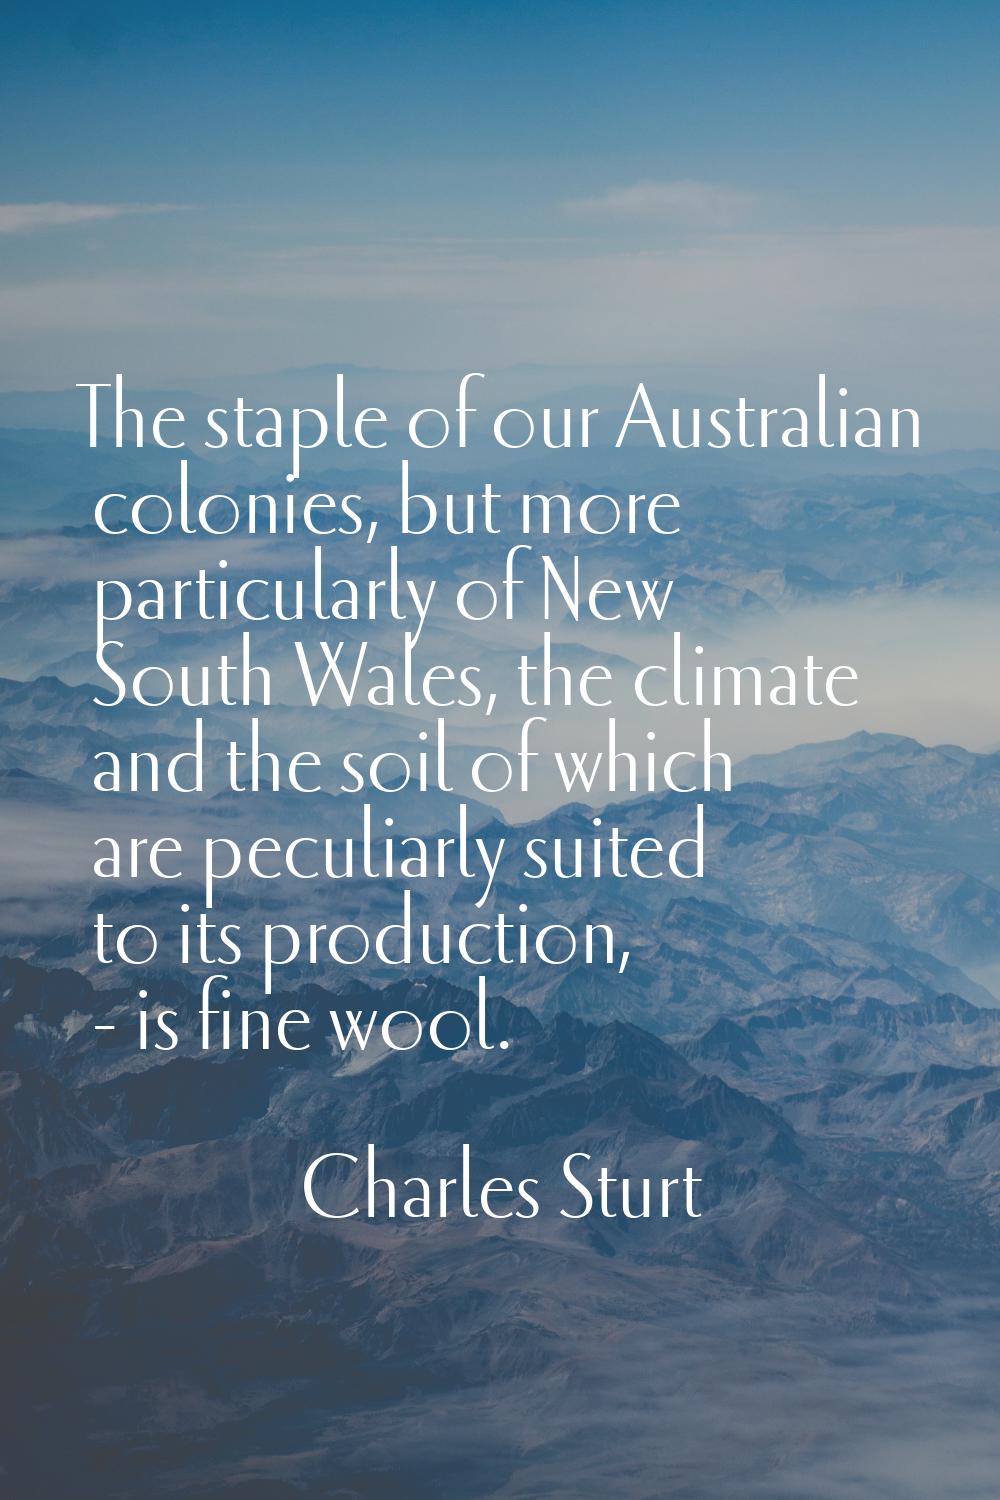 The staple of our Australian colonies, but more particularly of New South Wales, the climate and th